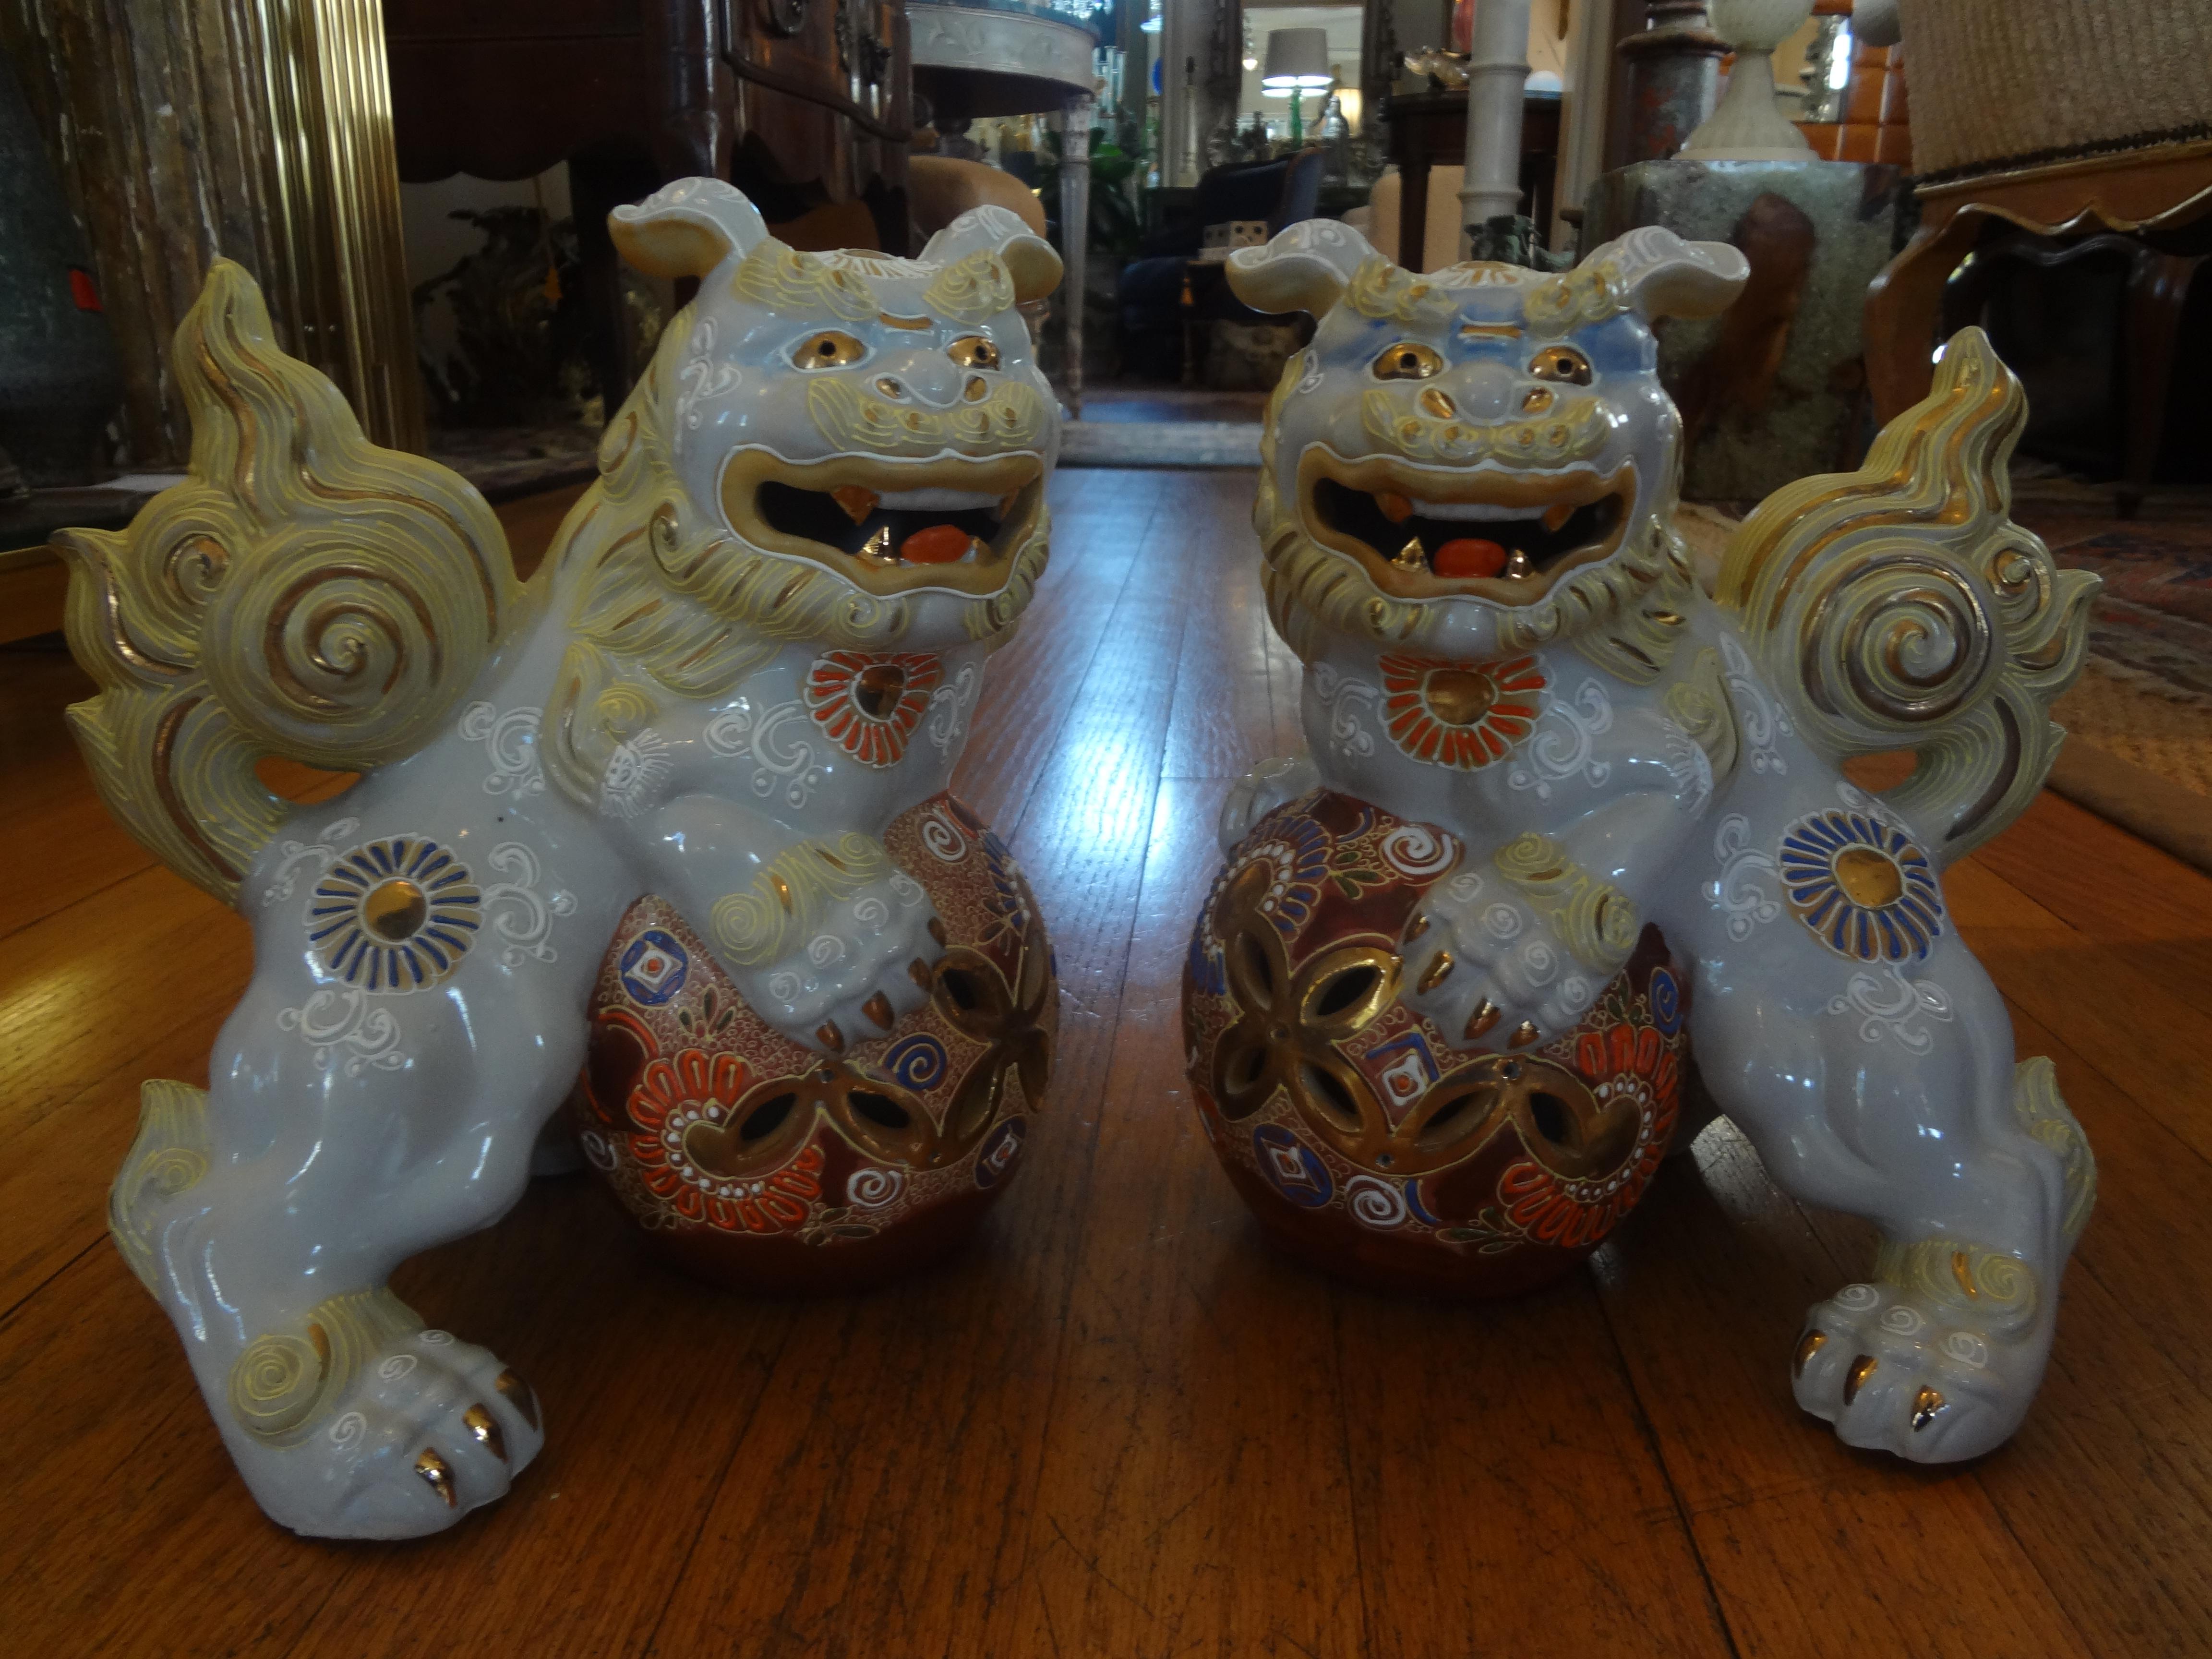 Pair of Japanese glazed porcelain foo dogs. These beautiful Japanese foo dogs or foo lions are the perfect accessory for a cocktail table or book shelf. Great colors and size!.